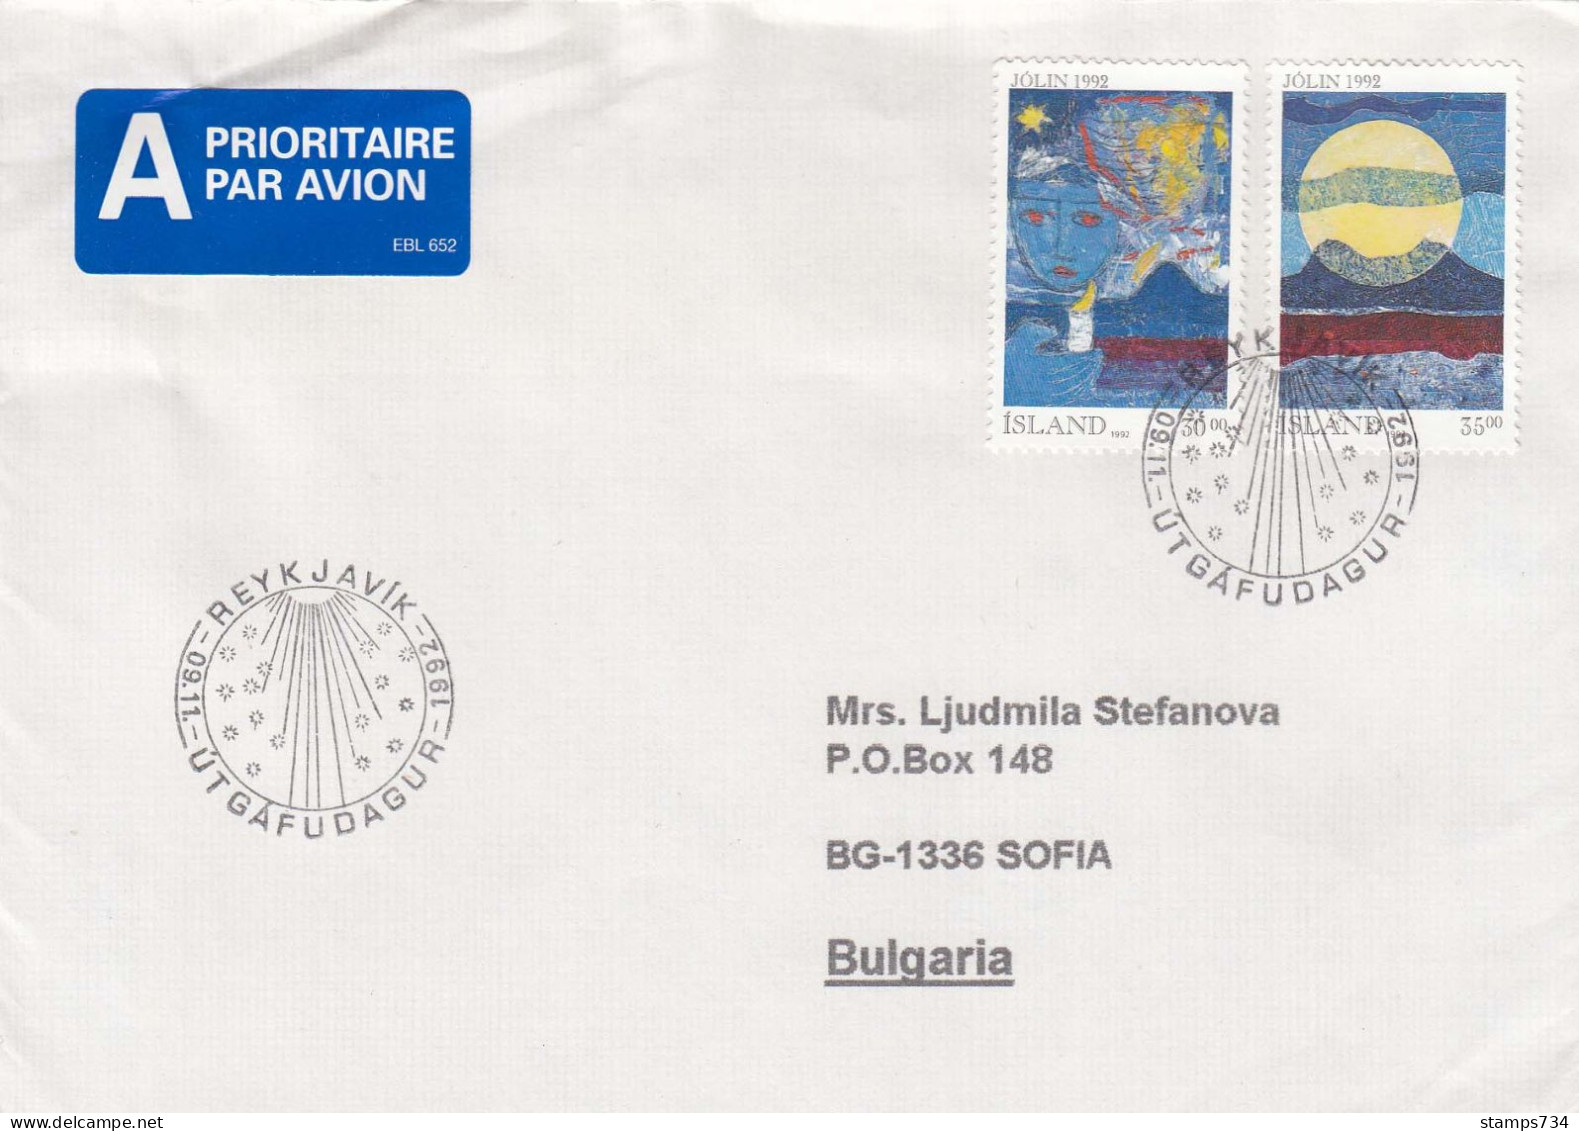 Iceland 1992 - Christmas, Letter Ordinary+priority With FDC Cancelation From Reykjavik To Sofia/Bulgaria - Covers & Documents